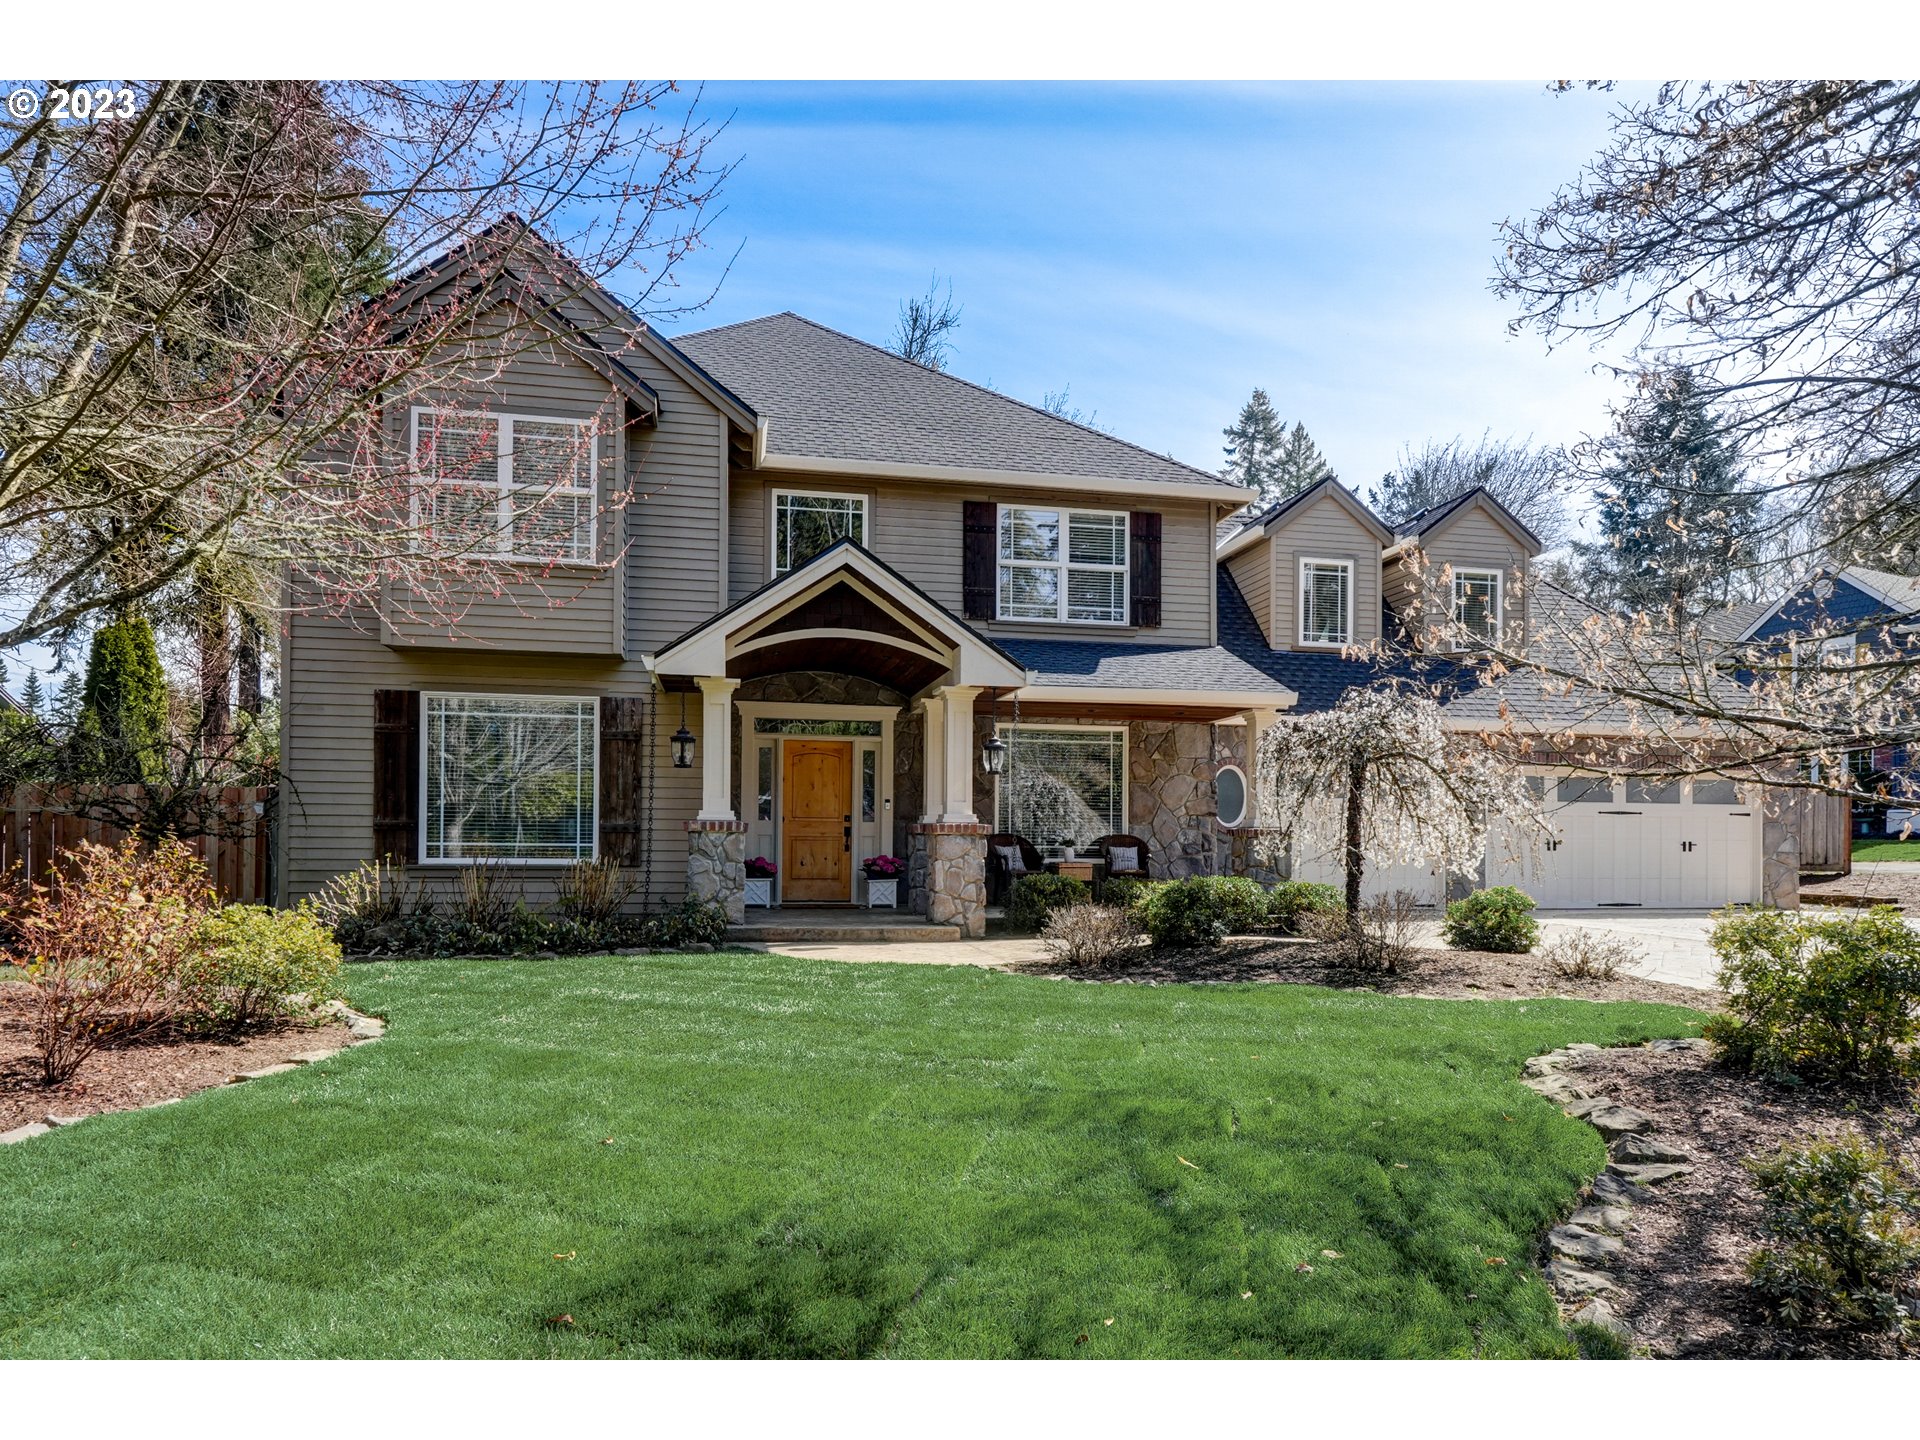 3680 ROBIN VIEW DR, West Linn, OR 97068